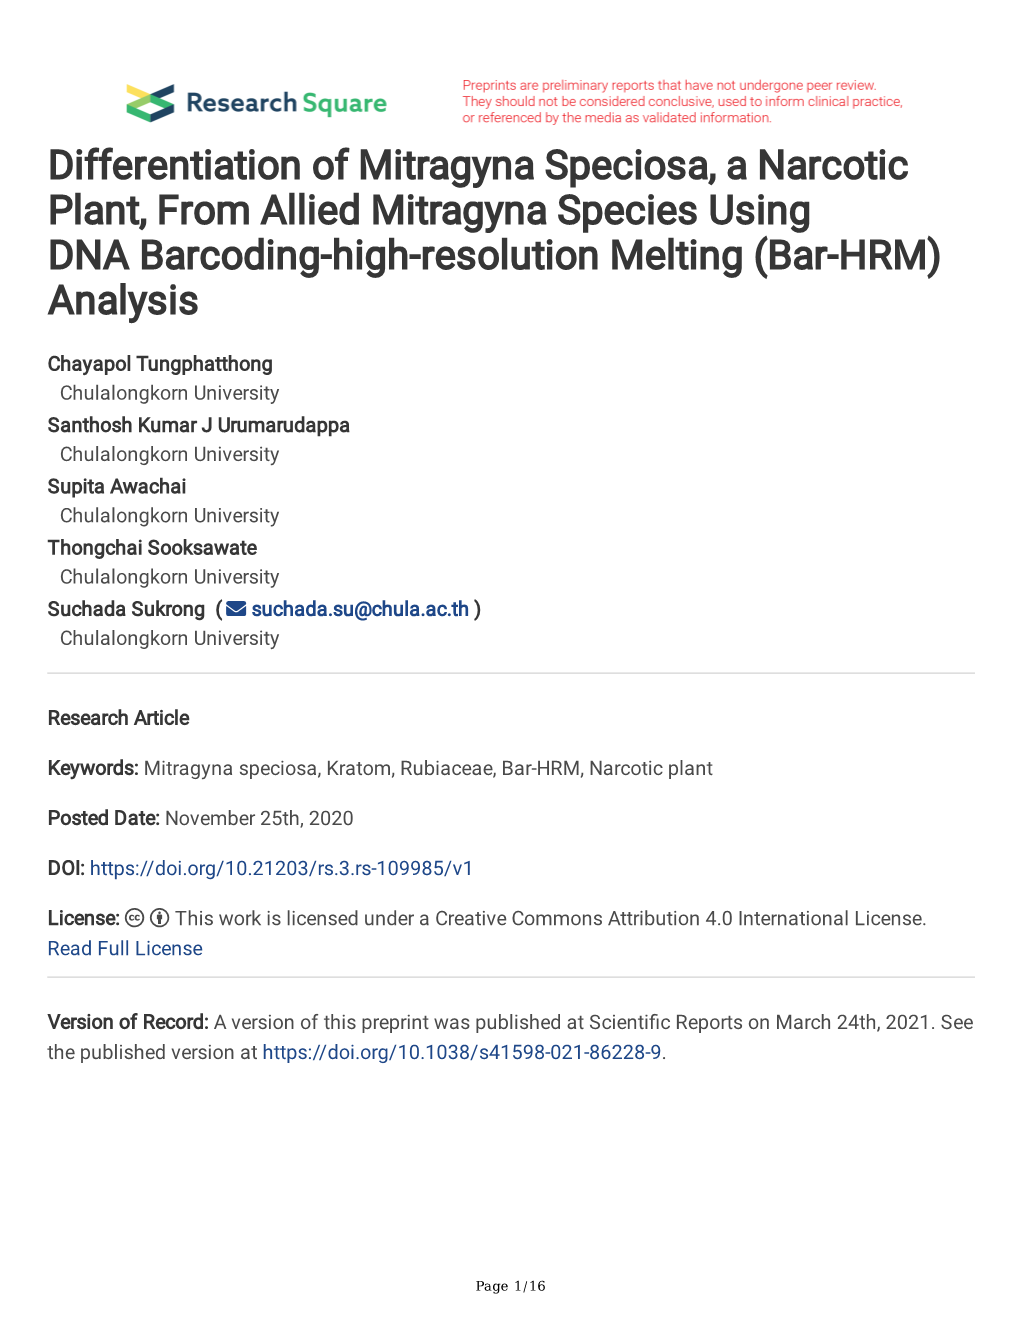 Differentiation of Mitragyna Speciosa, a Narcotic Plant, from Allied Mitragyna Species Using DNA Barcoding-High-Resolution Melting (Bar-HRM) Analysis